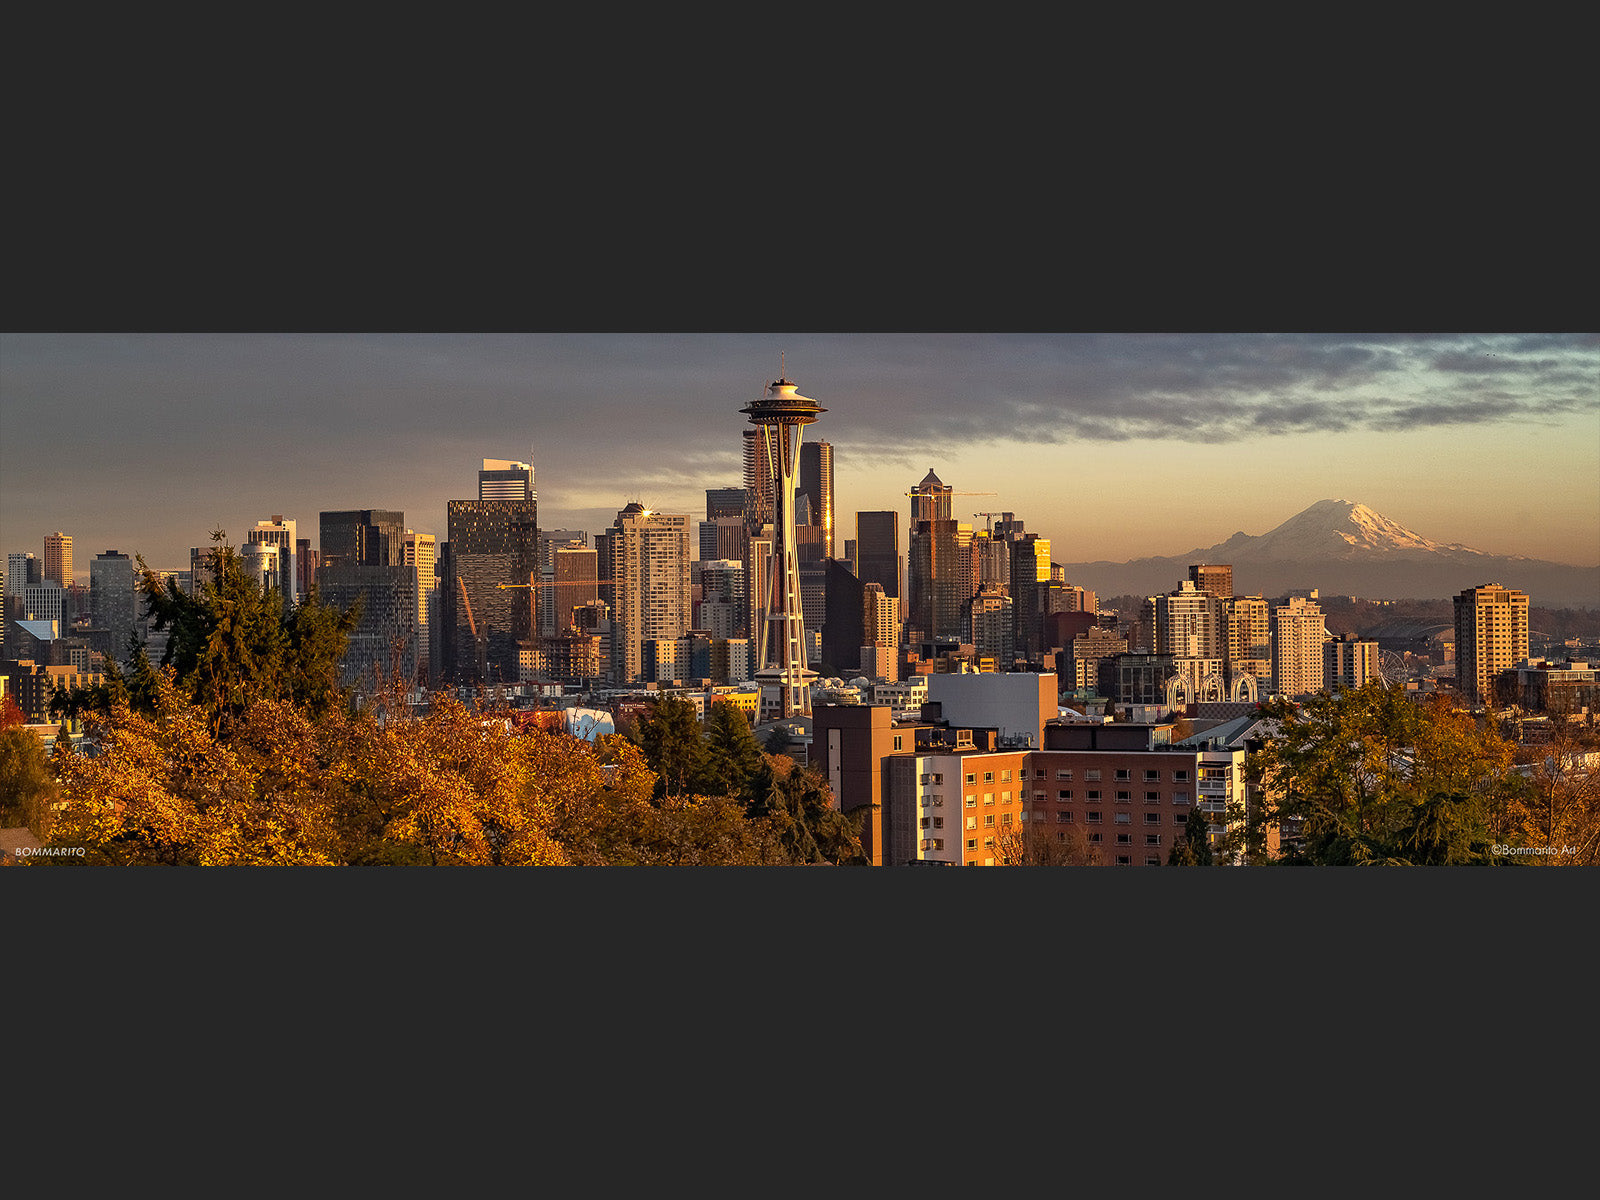 Seattle Skyline from Kerry Park